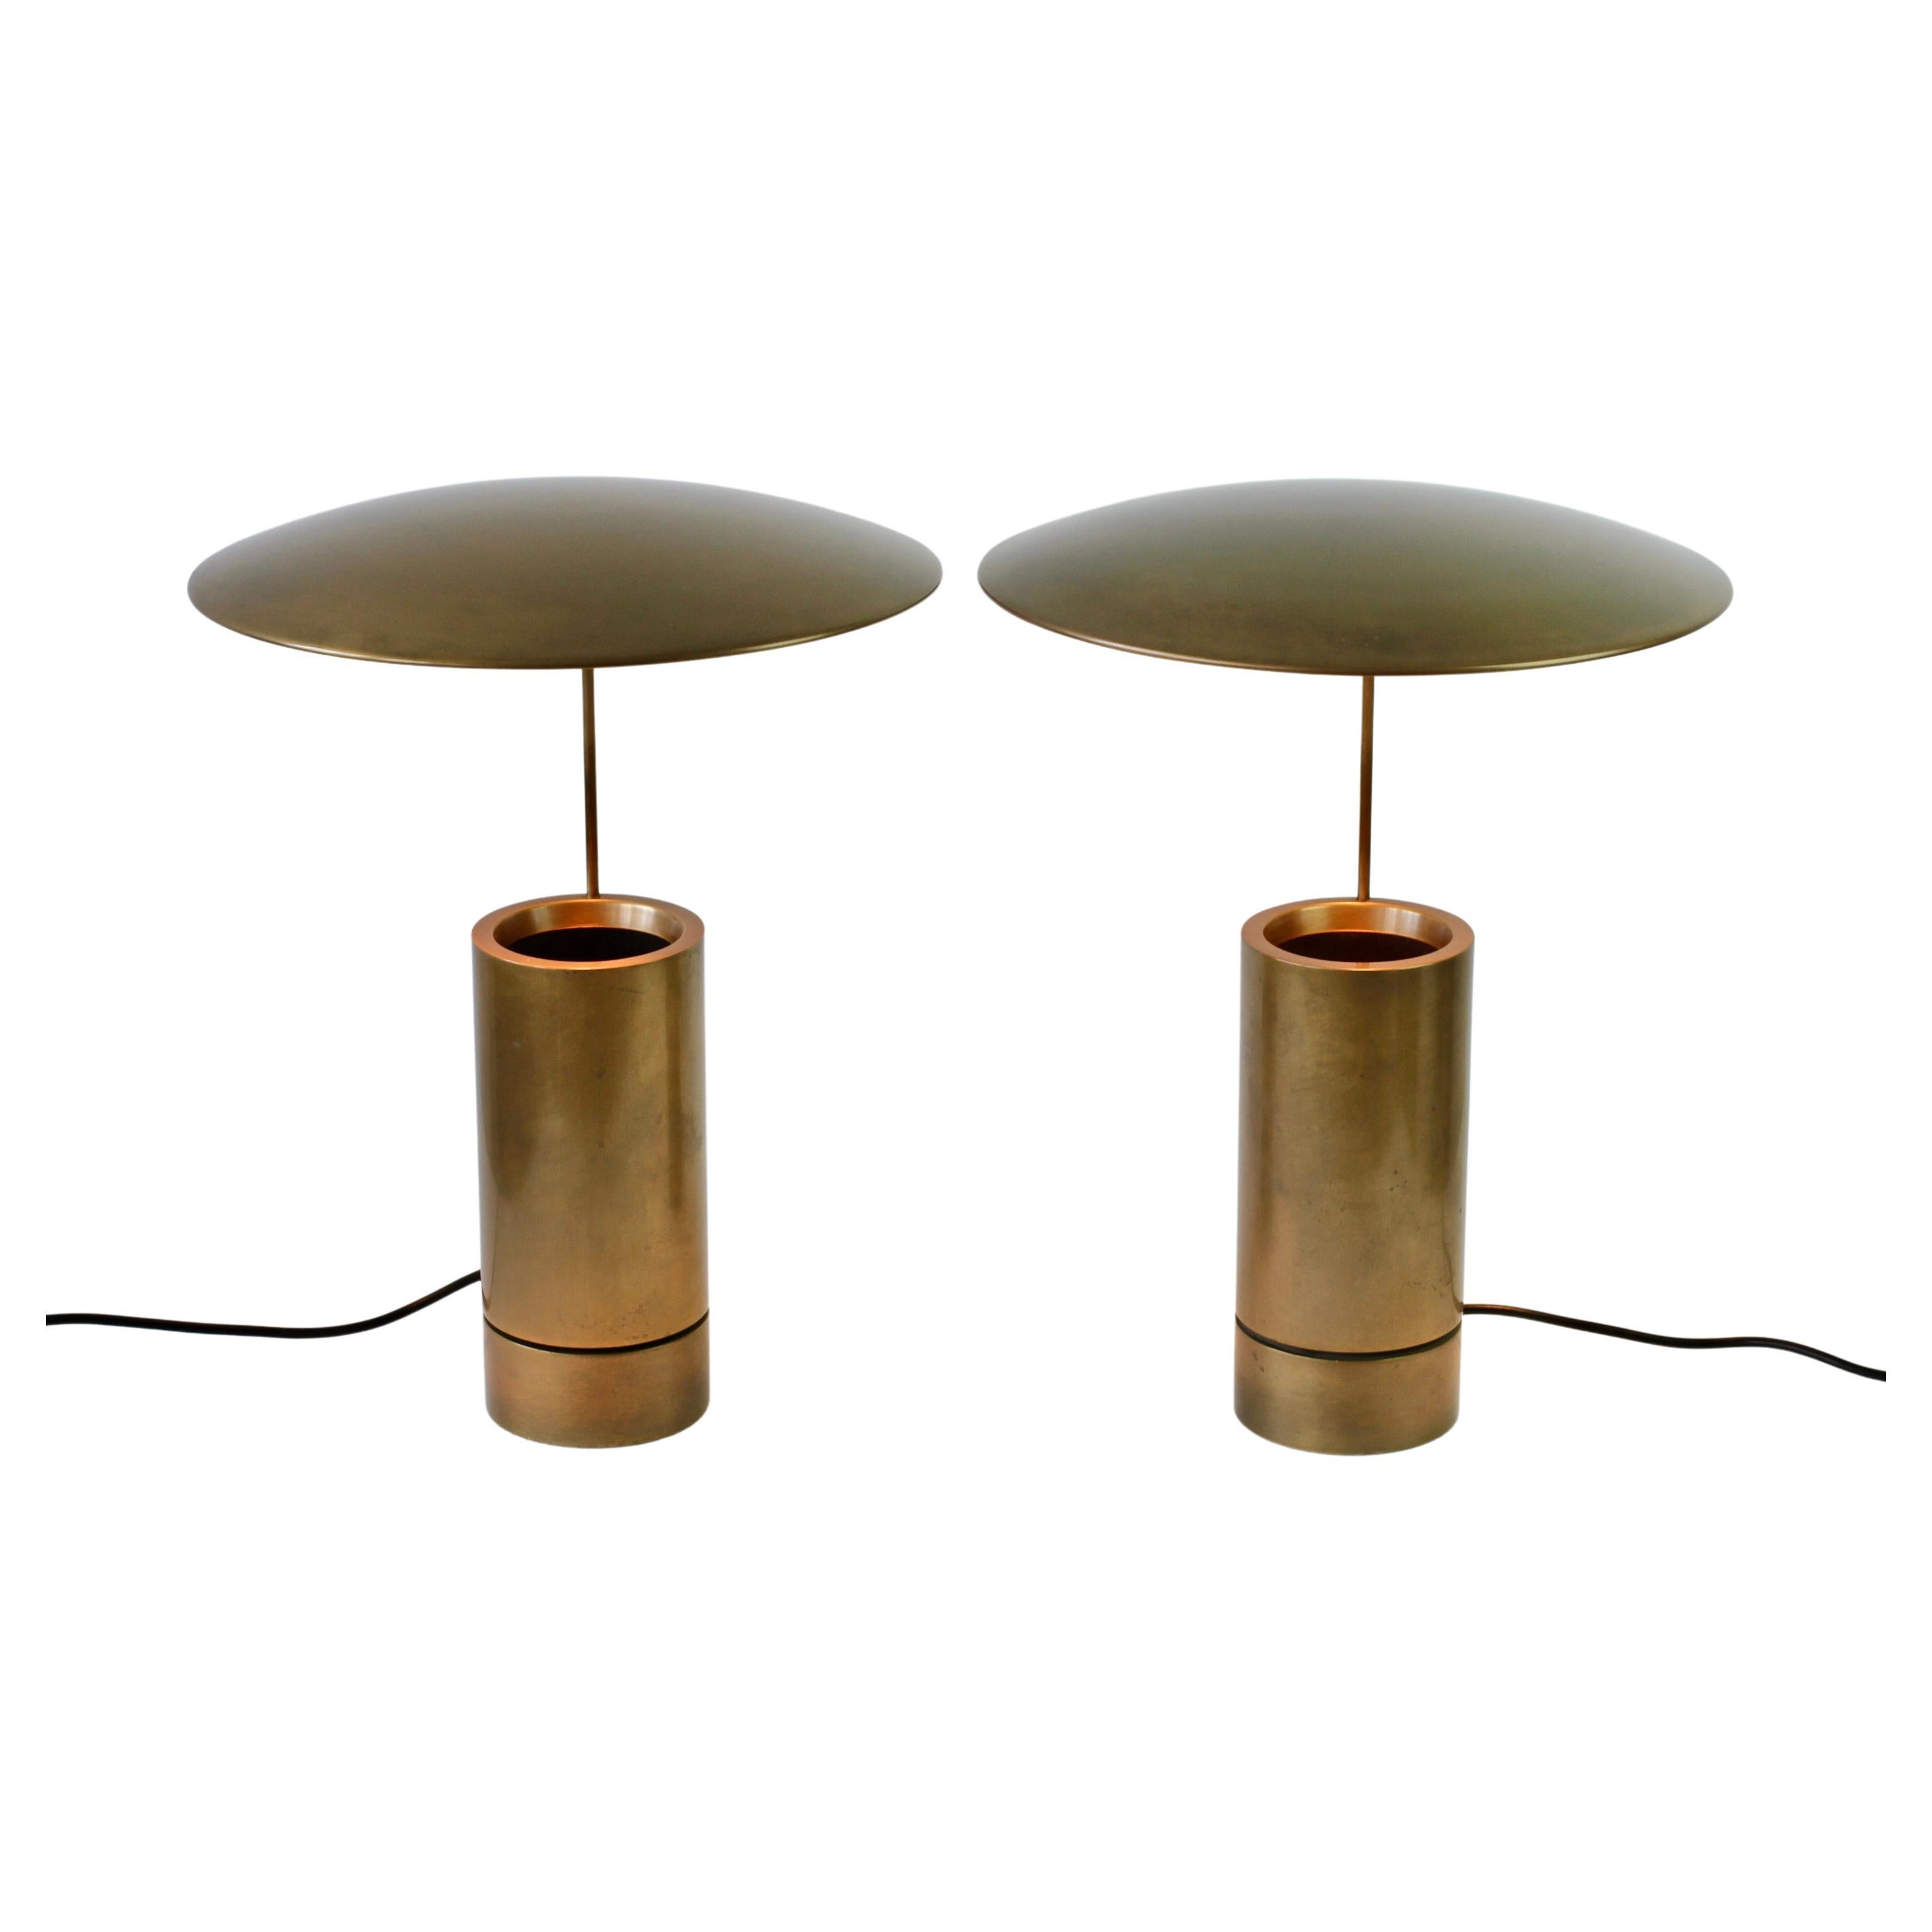 Florian Schulz Rare Pair or 'TOS' Vintage Modernist Brushed Brass Table Lamps